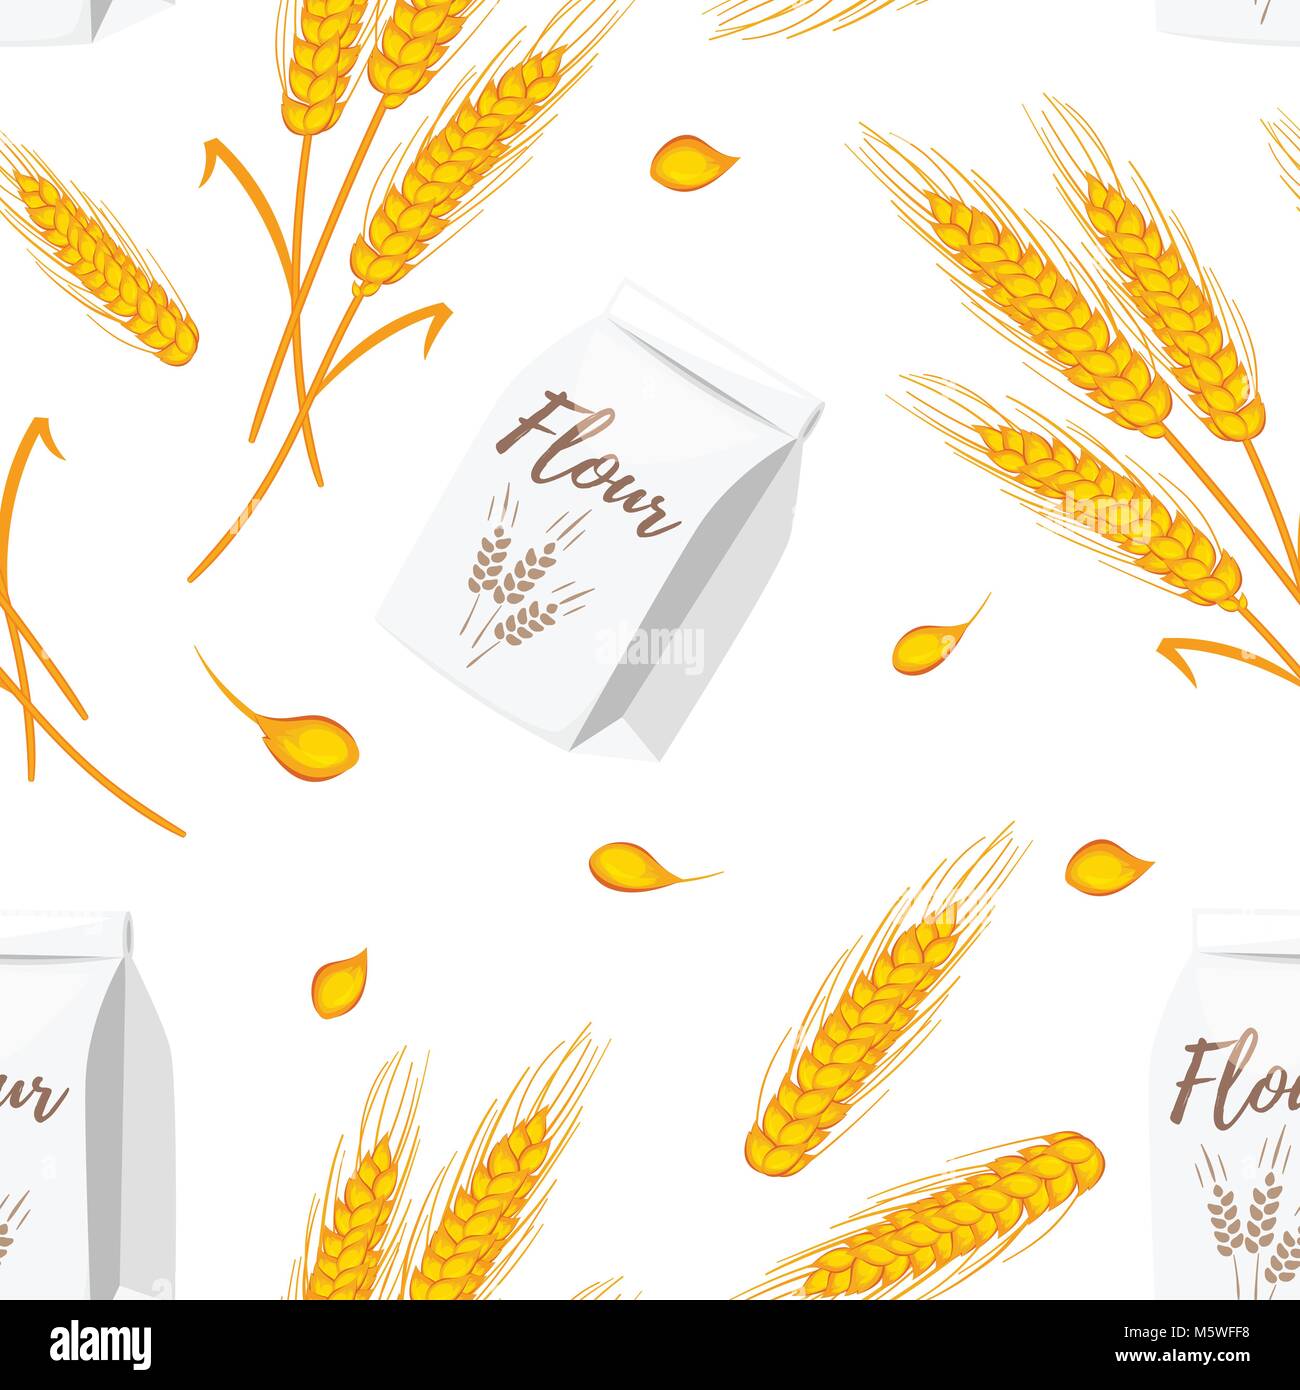 Vector cartoon style seamless pattern with wheat cereals, flour package. Grain plant isolated on white background. Stock Vector